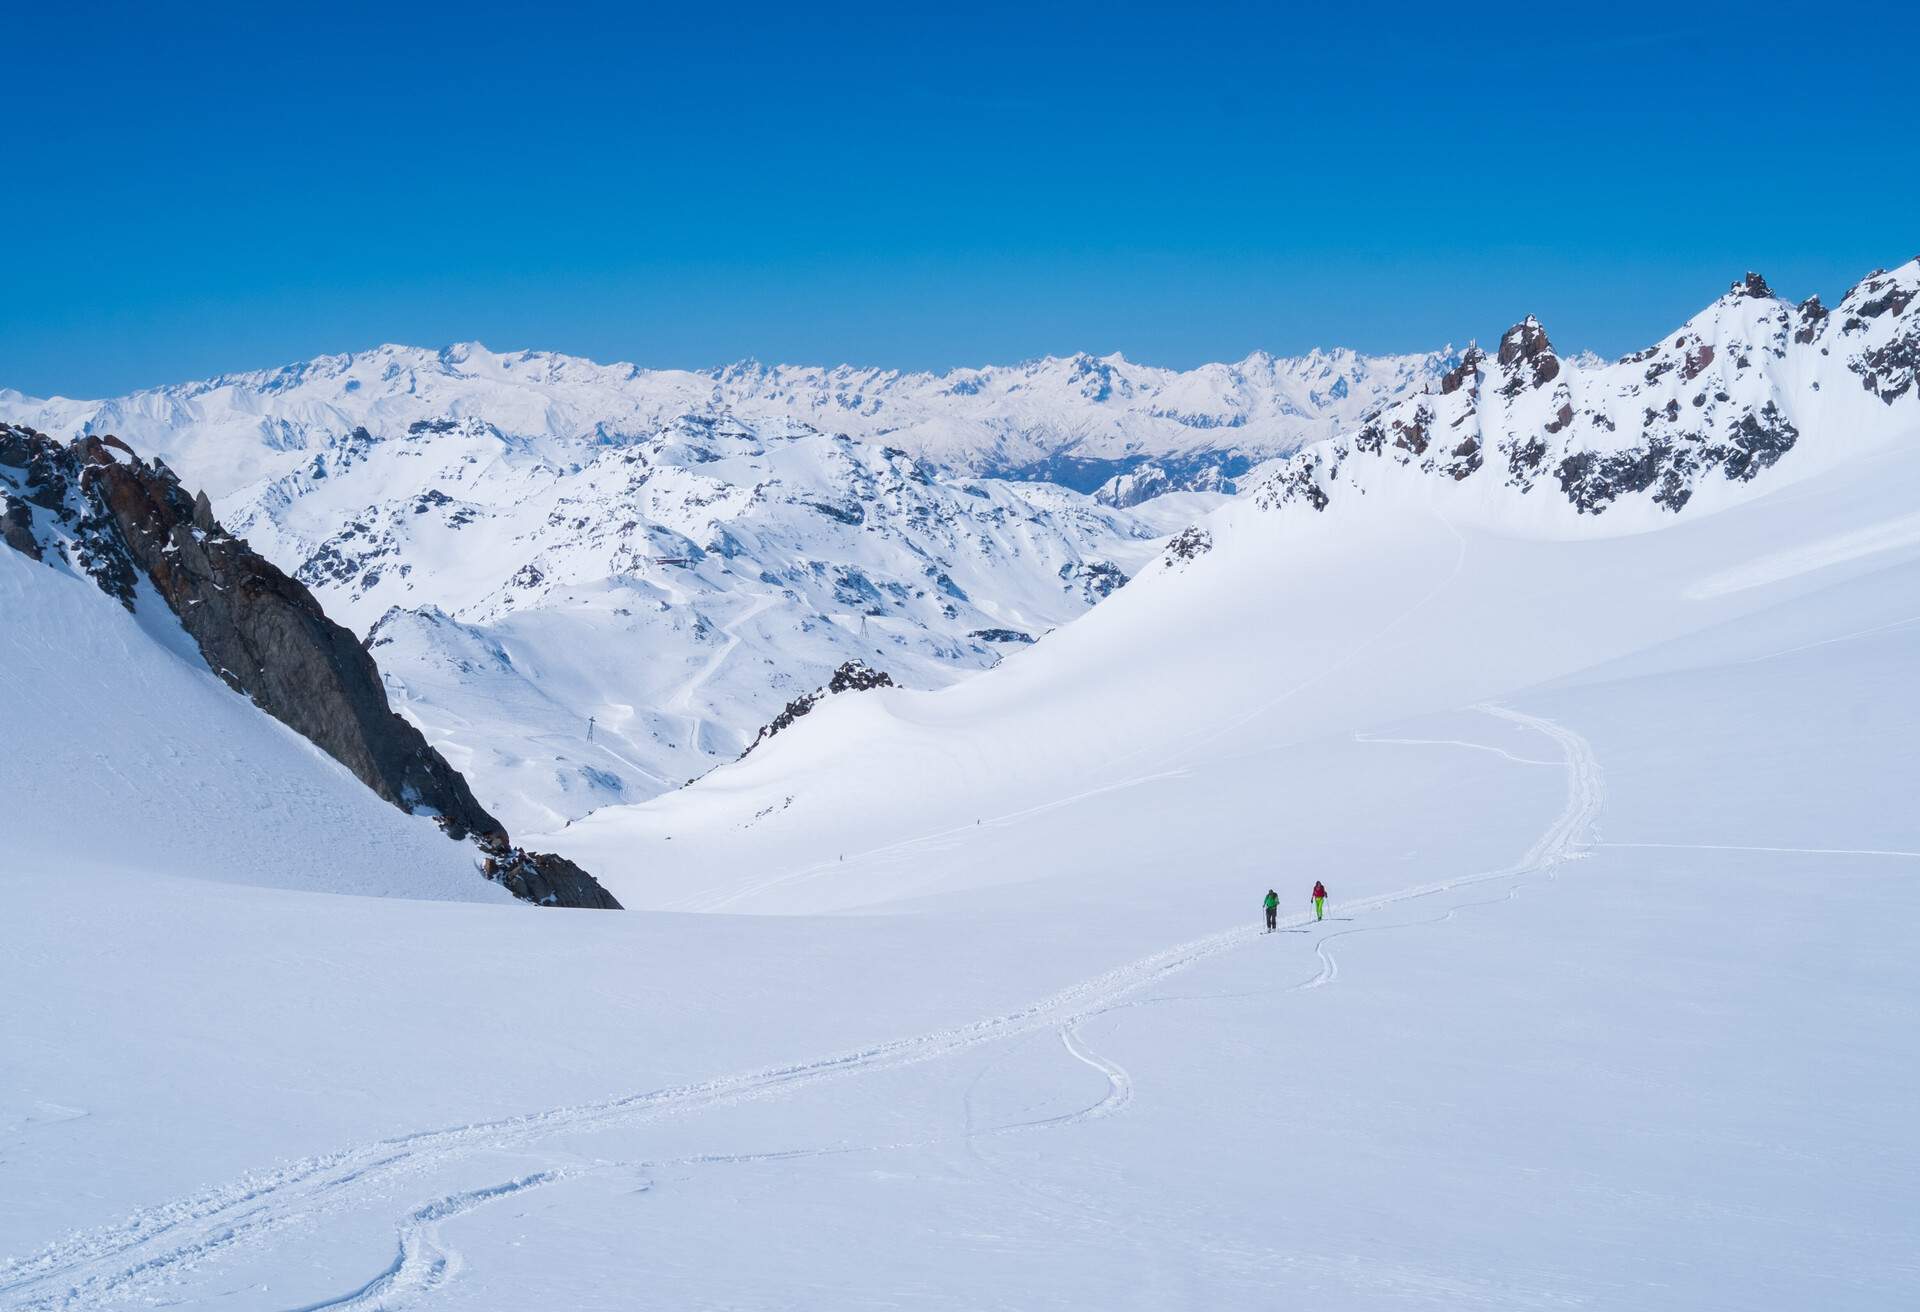 Ski alpinists skiing on the high mountans of Val Thorens, France